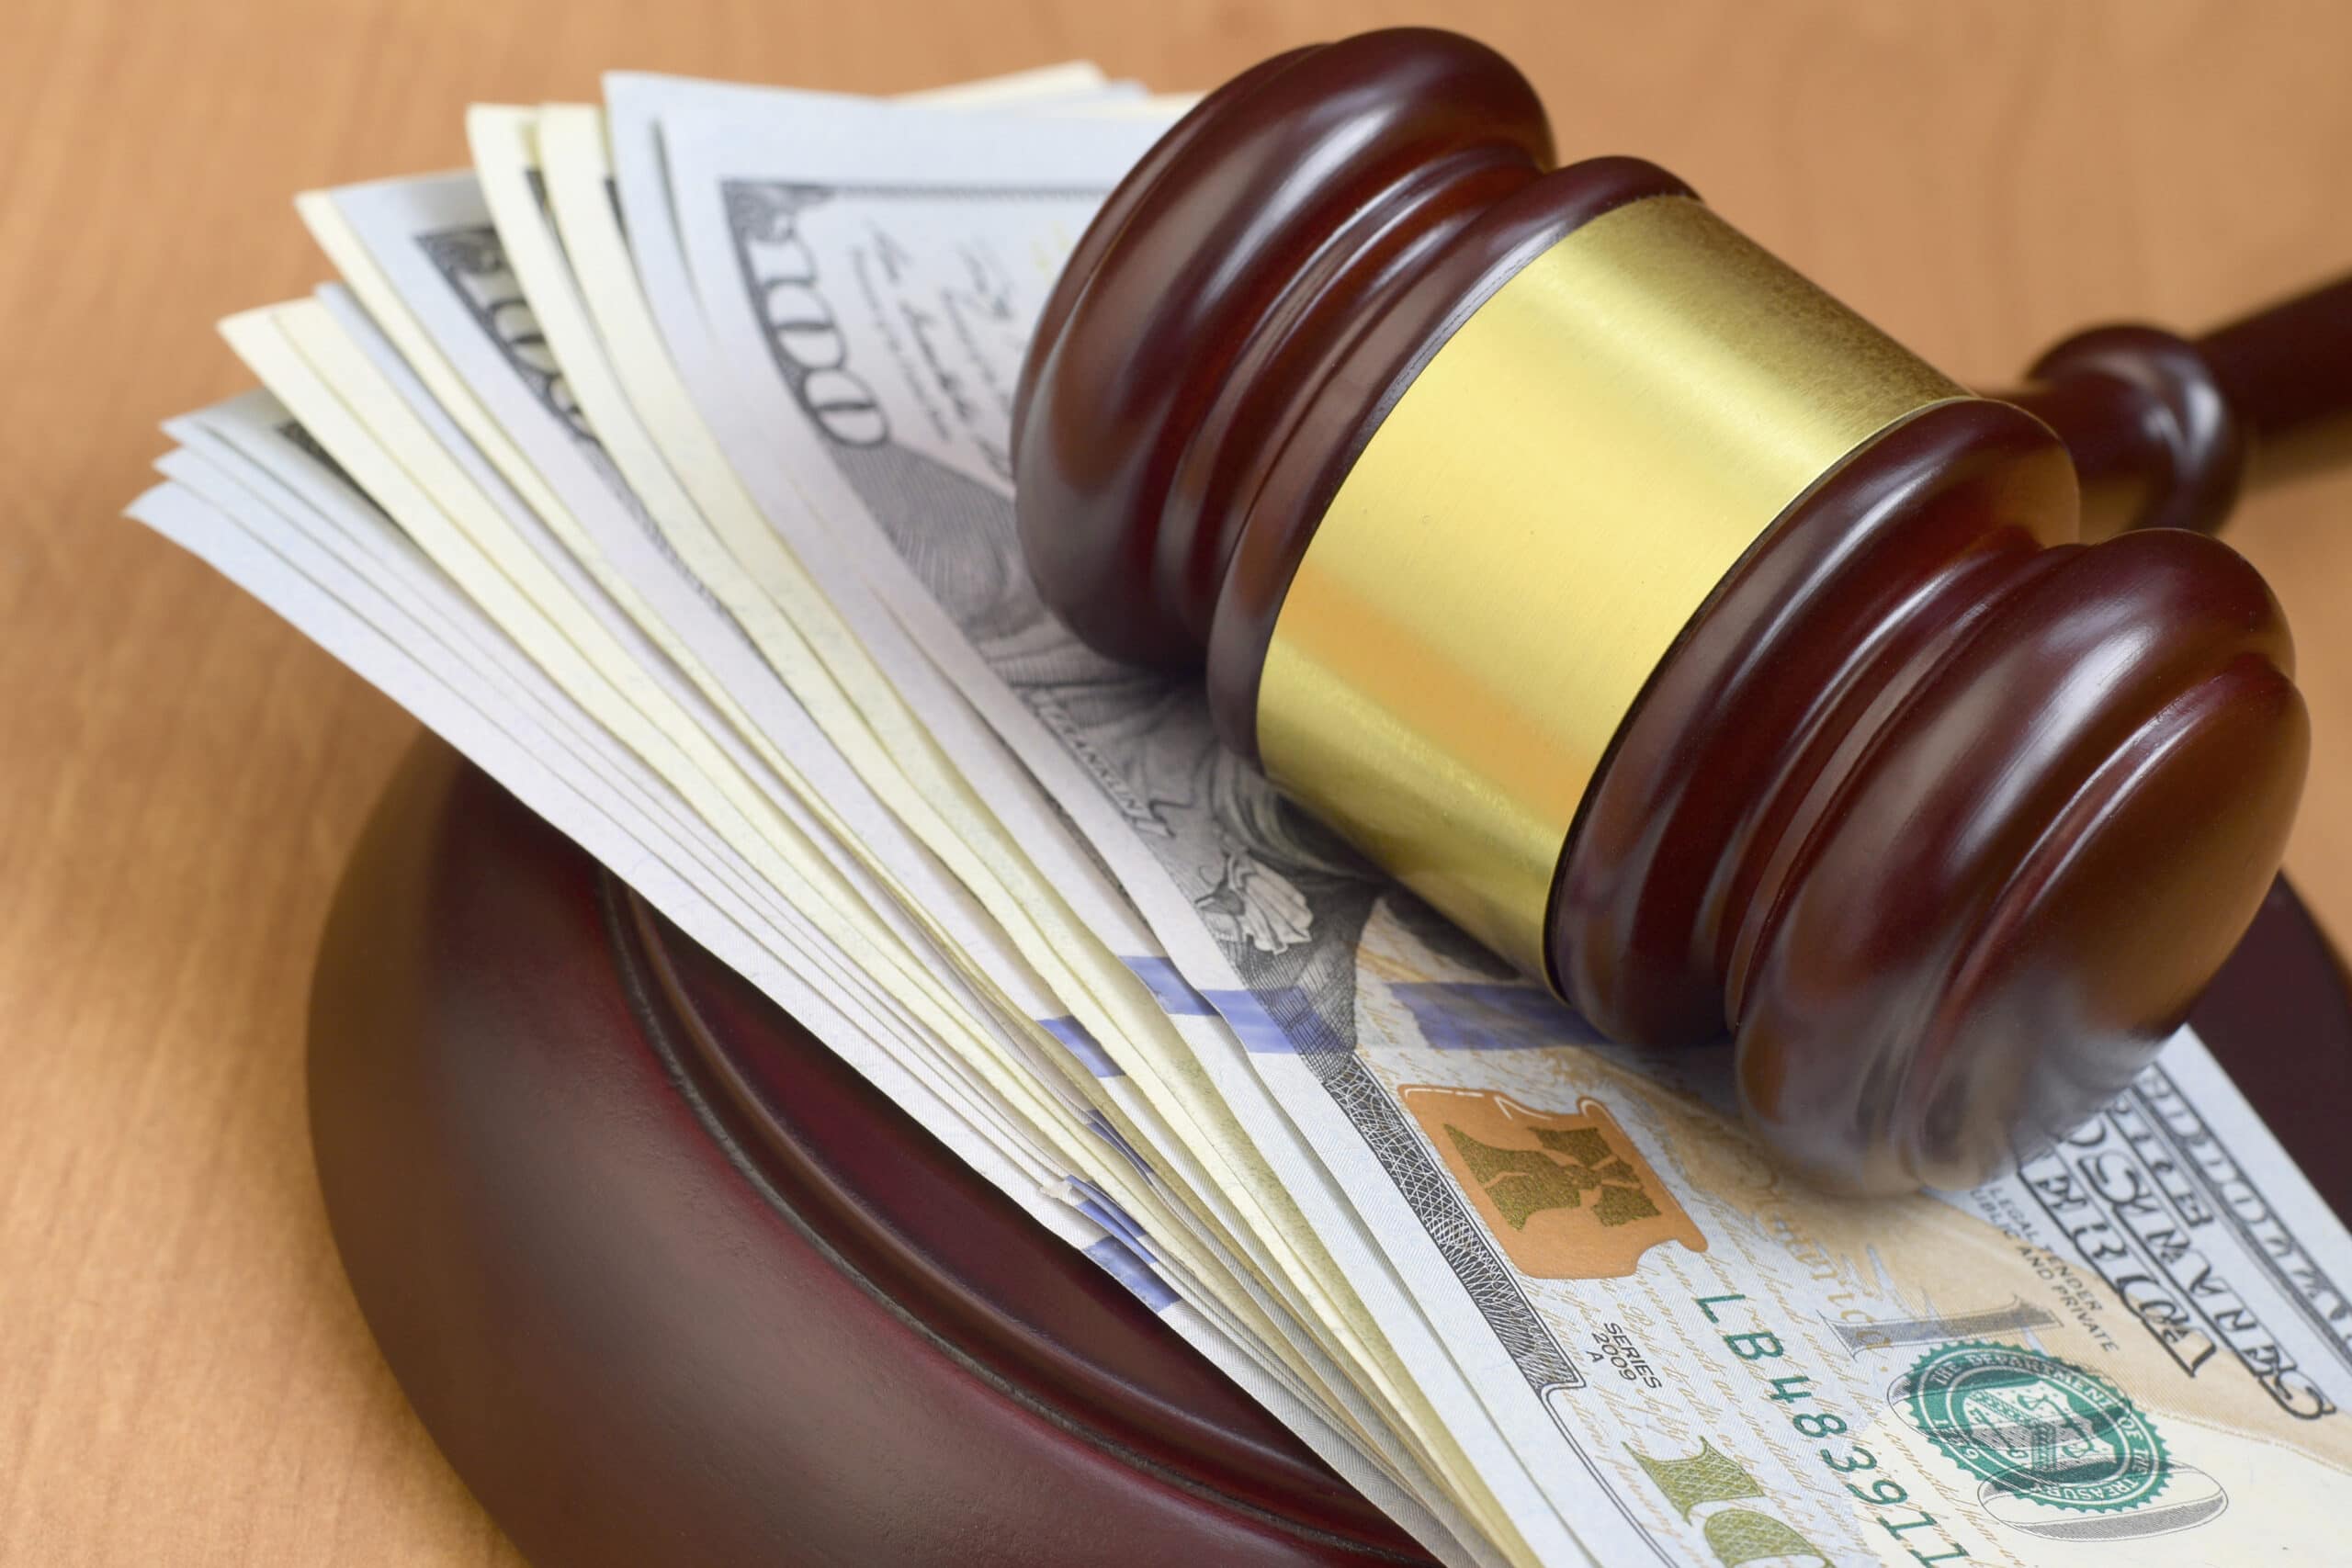 No Money For Restitution: What Are Your Options?